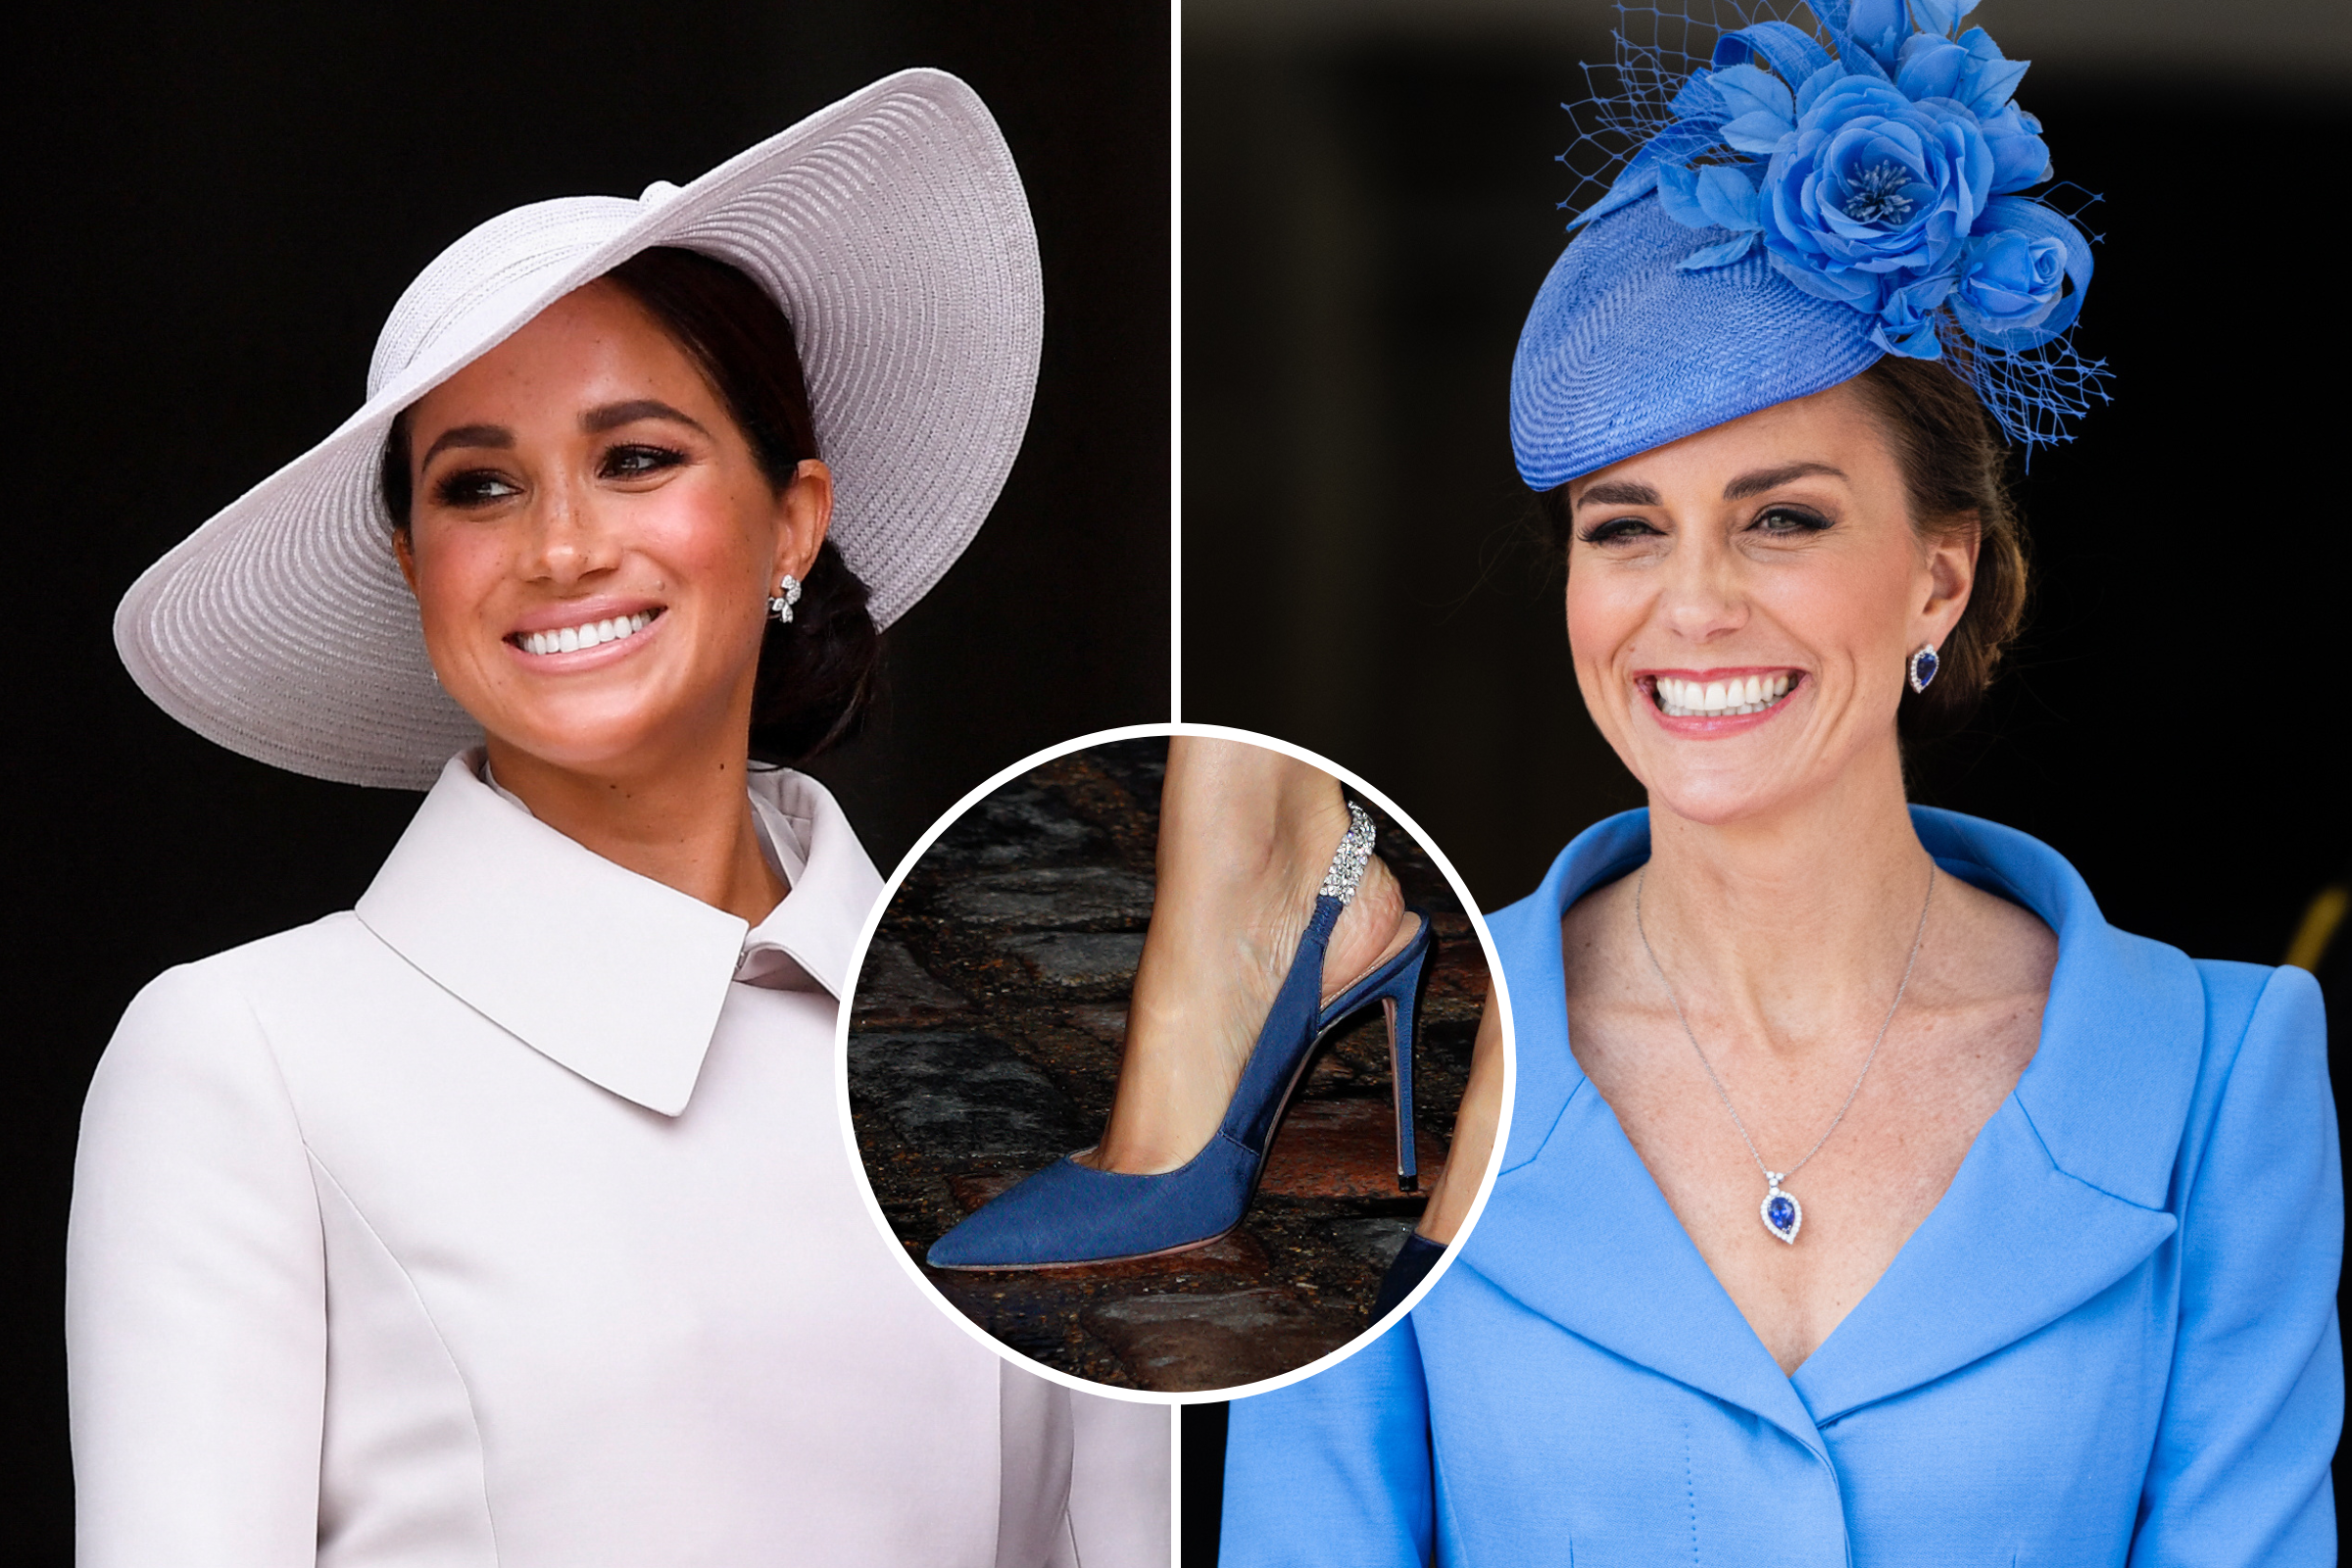 Meghan and Kate Middleton Share a Favorite Shoe